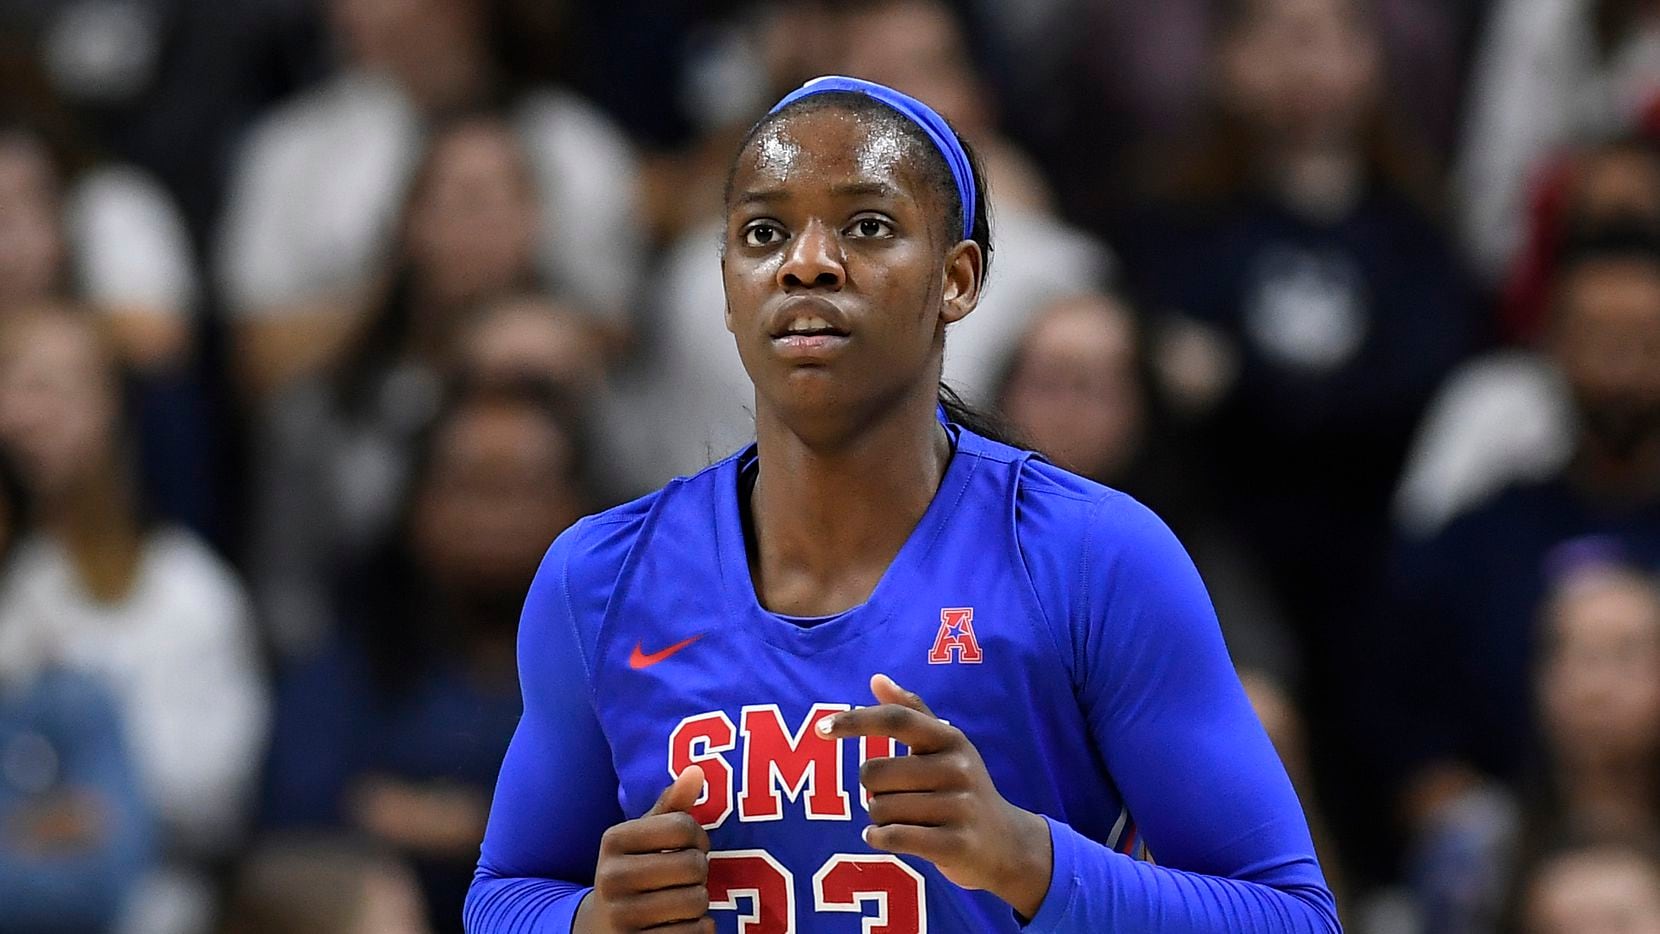 SMU's Johnasia Cash during an NCAA college basketball game, Thursday, Jan. 24, 2019, in...